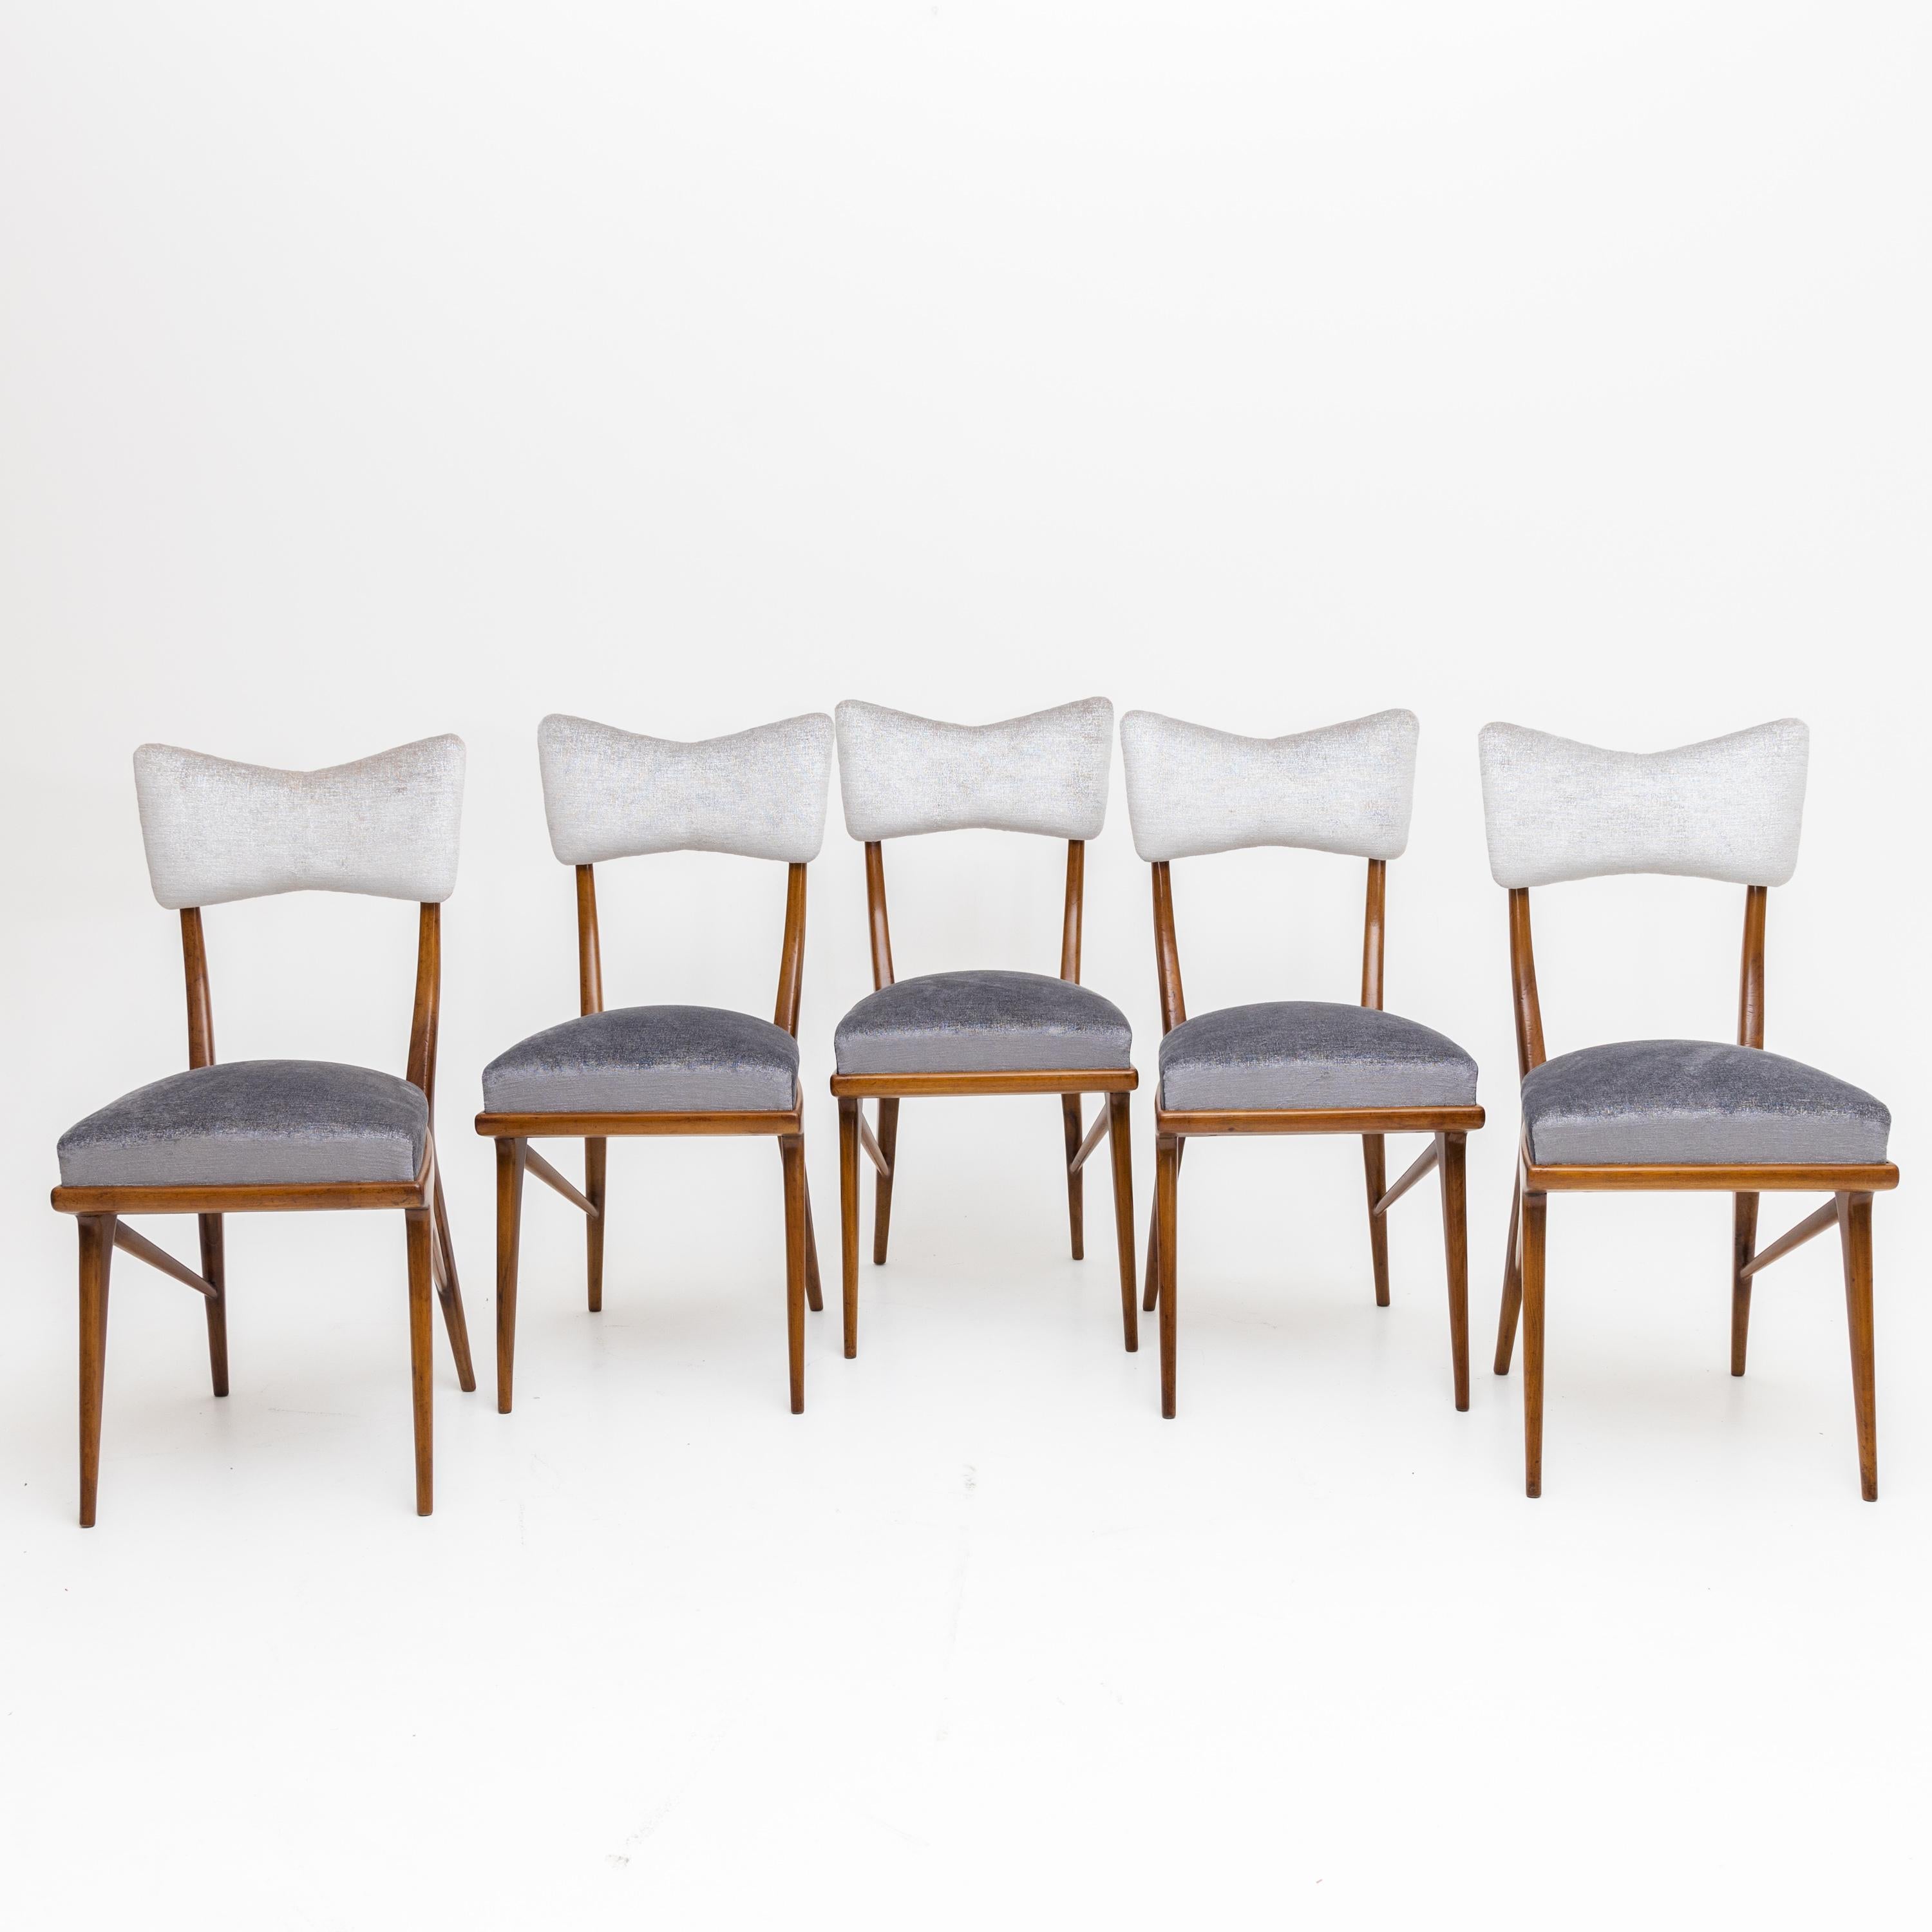 Set of six stylish Italian Modernist dining chairs. 
Cherrywood frames with upholstered seats and backs.